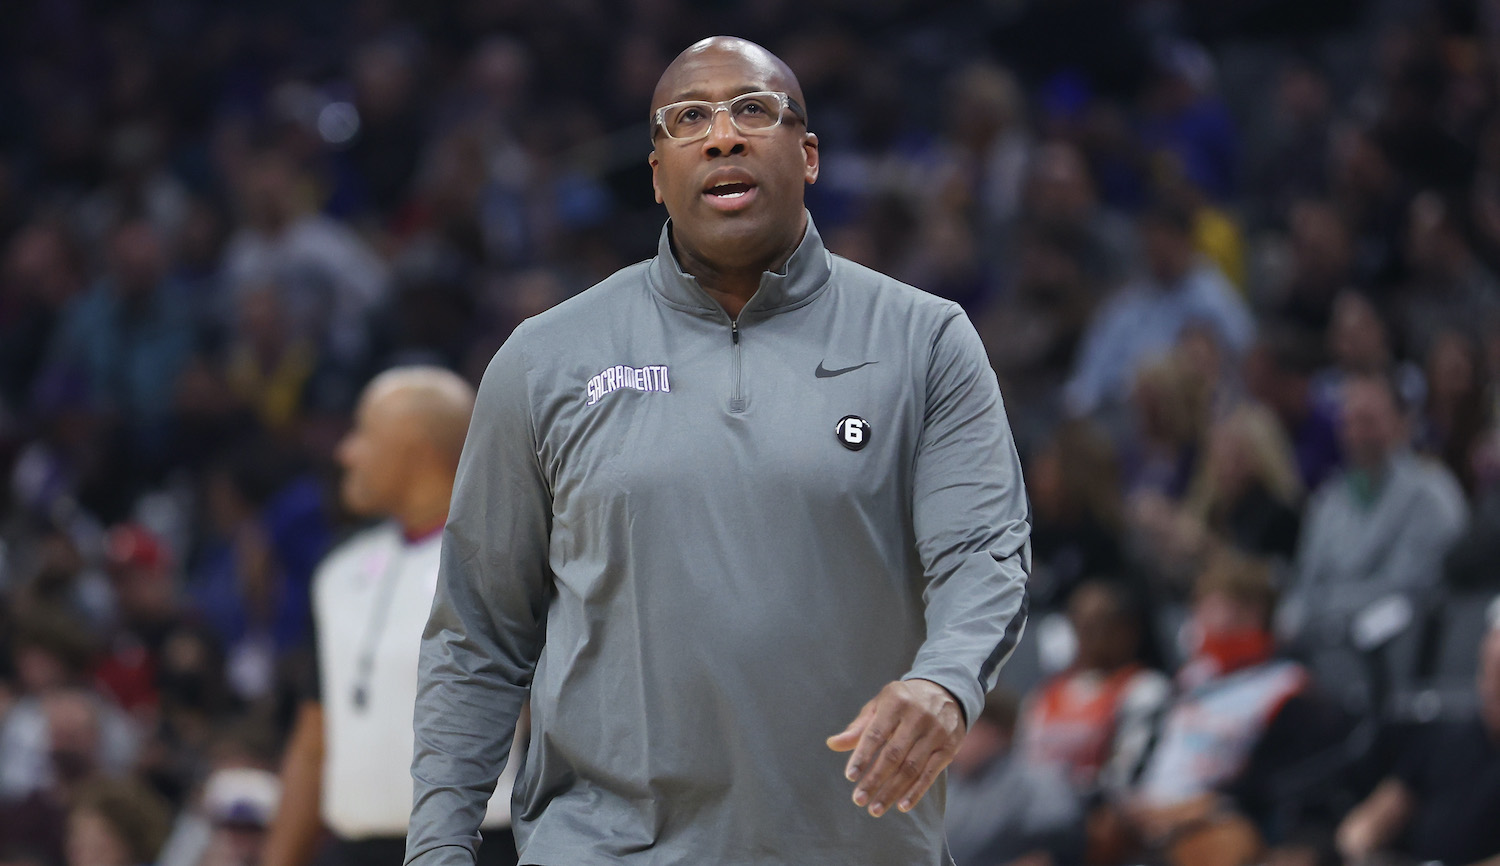 SACRAMENTO, CALIFORNIA - NOVEMBER 13: Mike Brown, head coach of the Sacramento Kings, looks on during the game against the Golden State Warriors at Golden 1 Center on November 13, 2022 in Sacramento, California. NOTE TO USER: User expressly acknowledges and agrees that, by downloading and/or using this photograph, User is consenting to the terms and conditions of the Getty Images License Agreement. (Photo by Lachlan Cunningham/Getty Images)